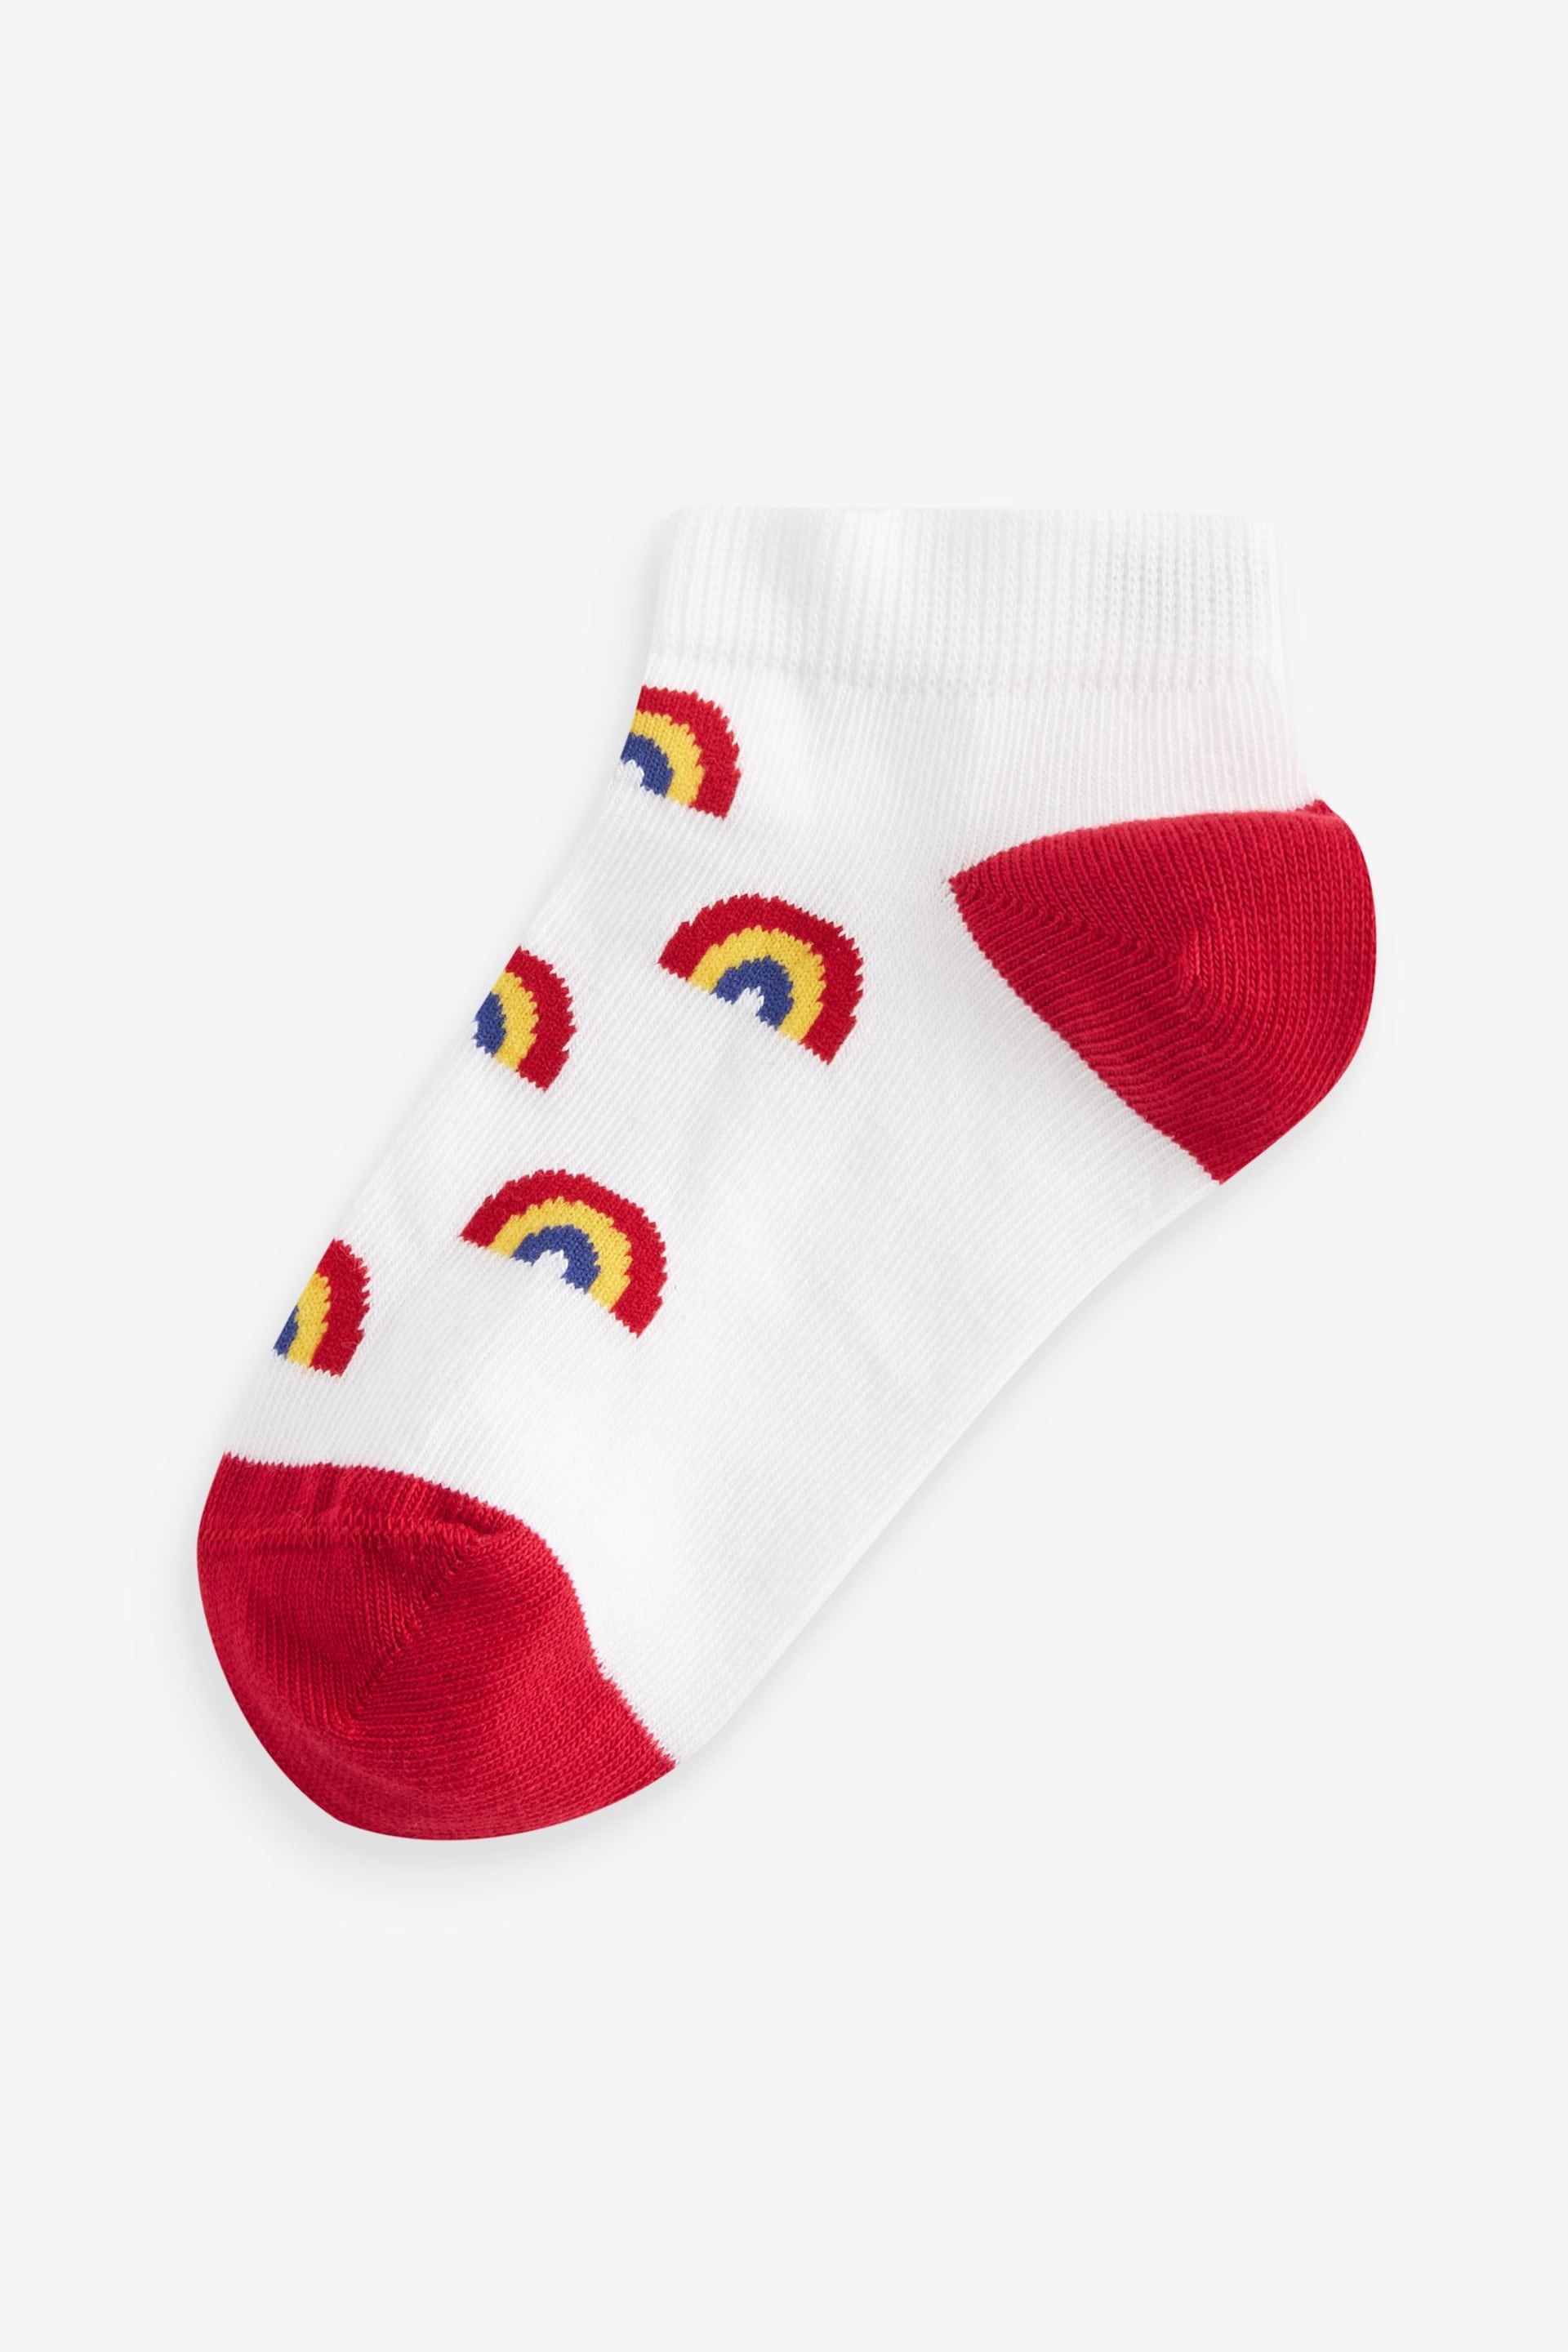 Bright Rainbows/Stripe Cotton Rich Trainers Socks 5 Pack - Image 5 of 6